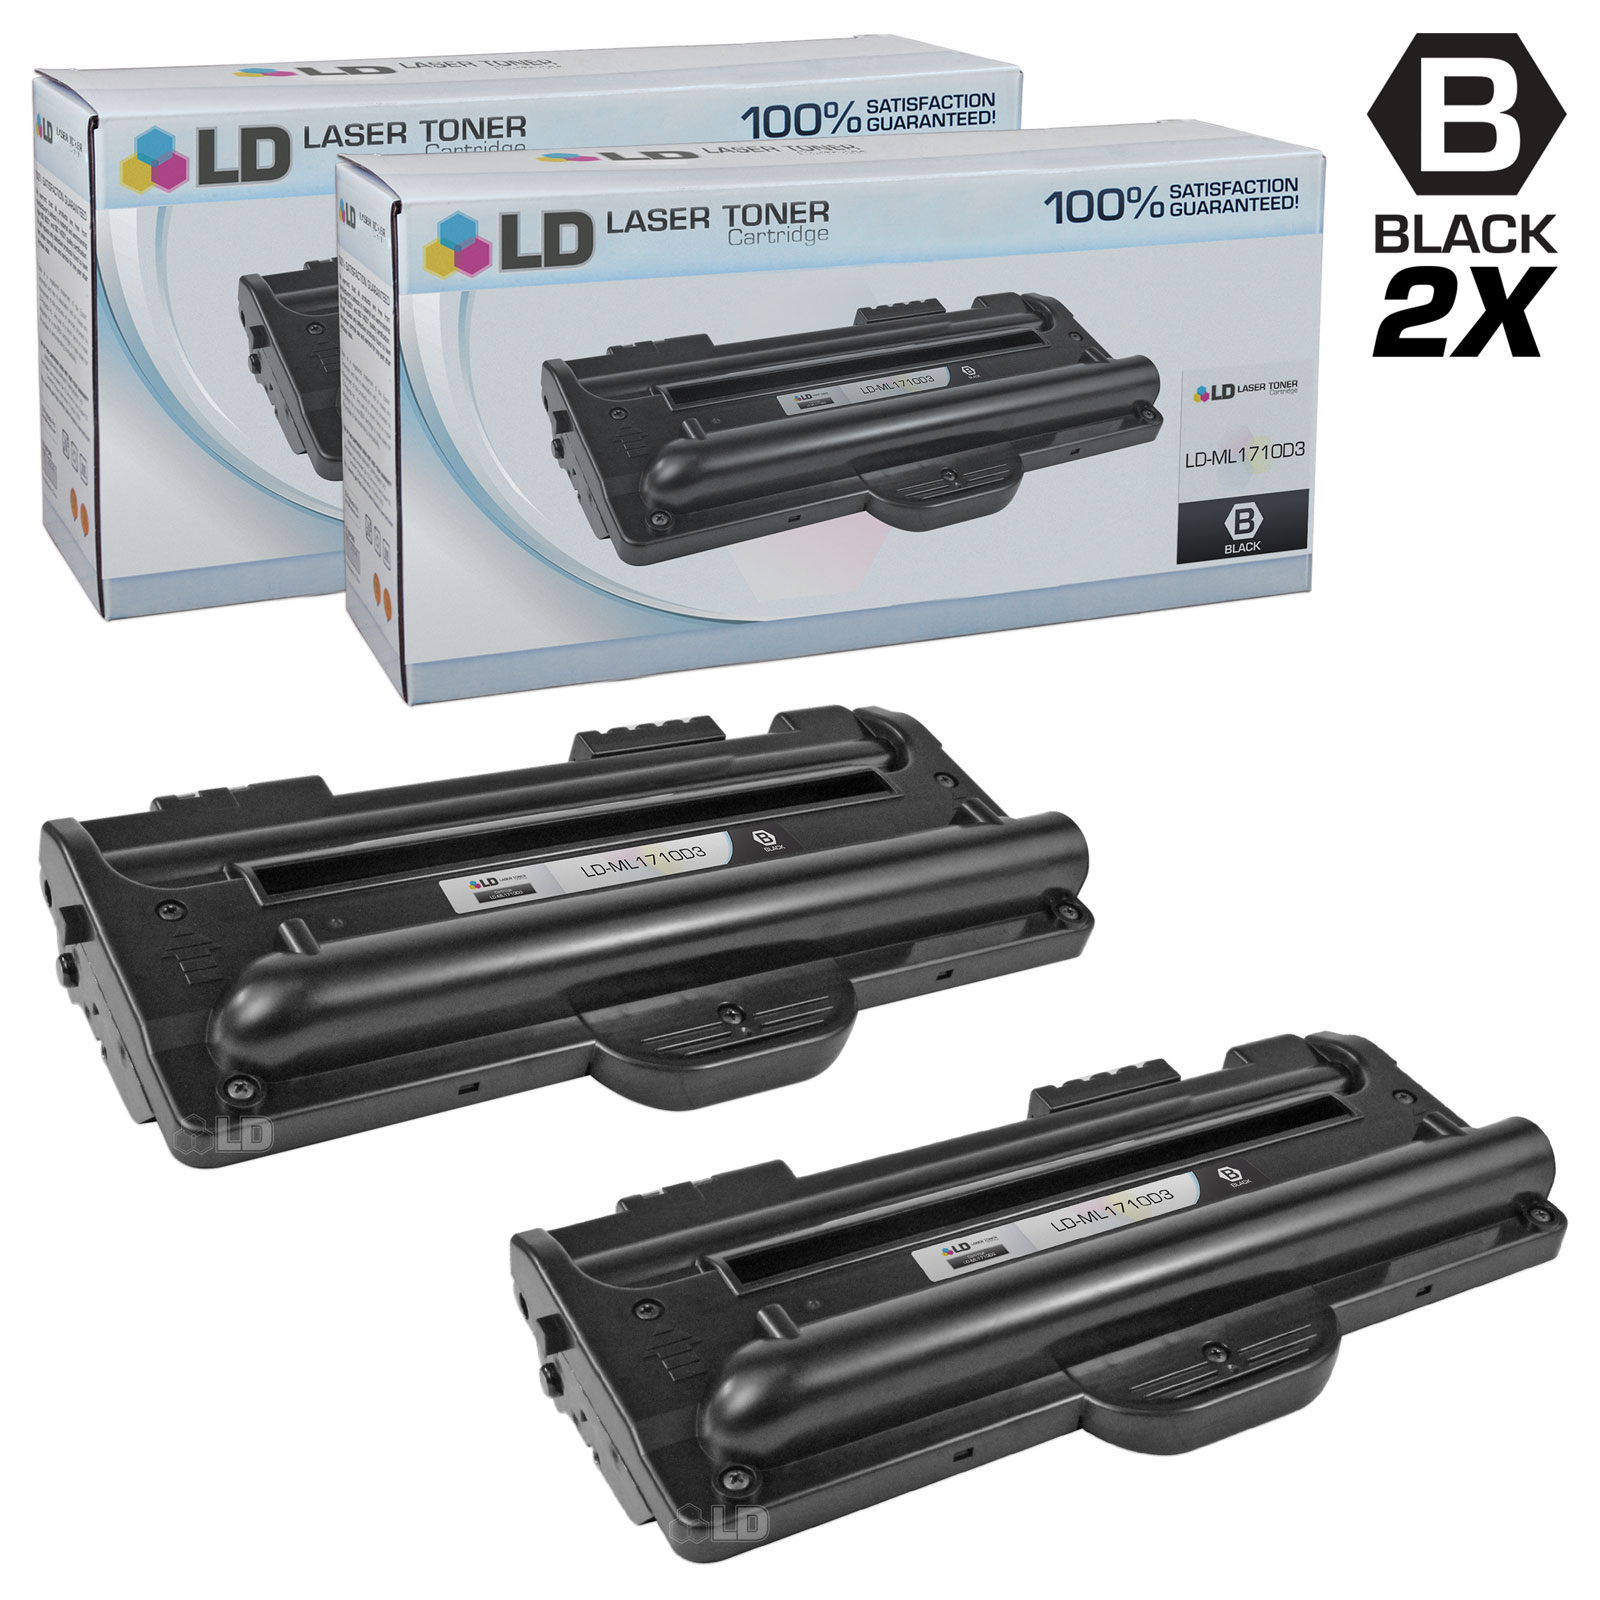 Compatible Replacements for Samsung ML-1710D3 Set of 2 Black Laser Toner Cartridges for the Samsung ML 1500, 1510, 1510B, 1520, 1710, 1710B, 1710D, 1710P, 1740, 1750, and 1755 s - image 1 of 1